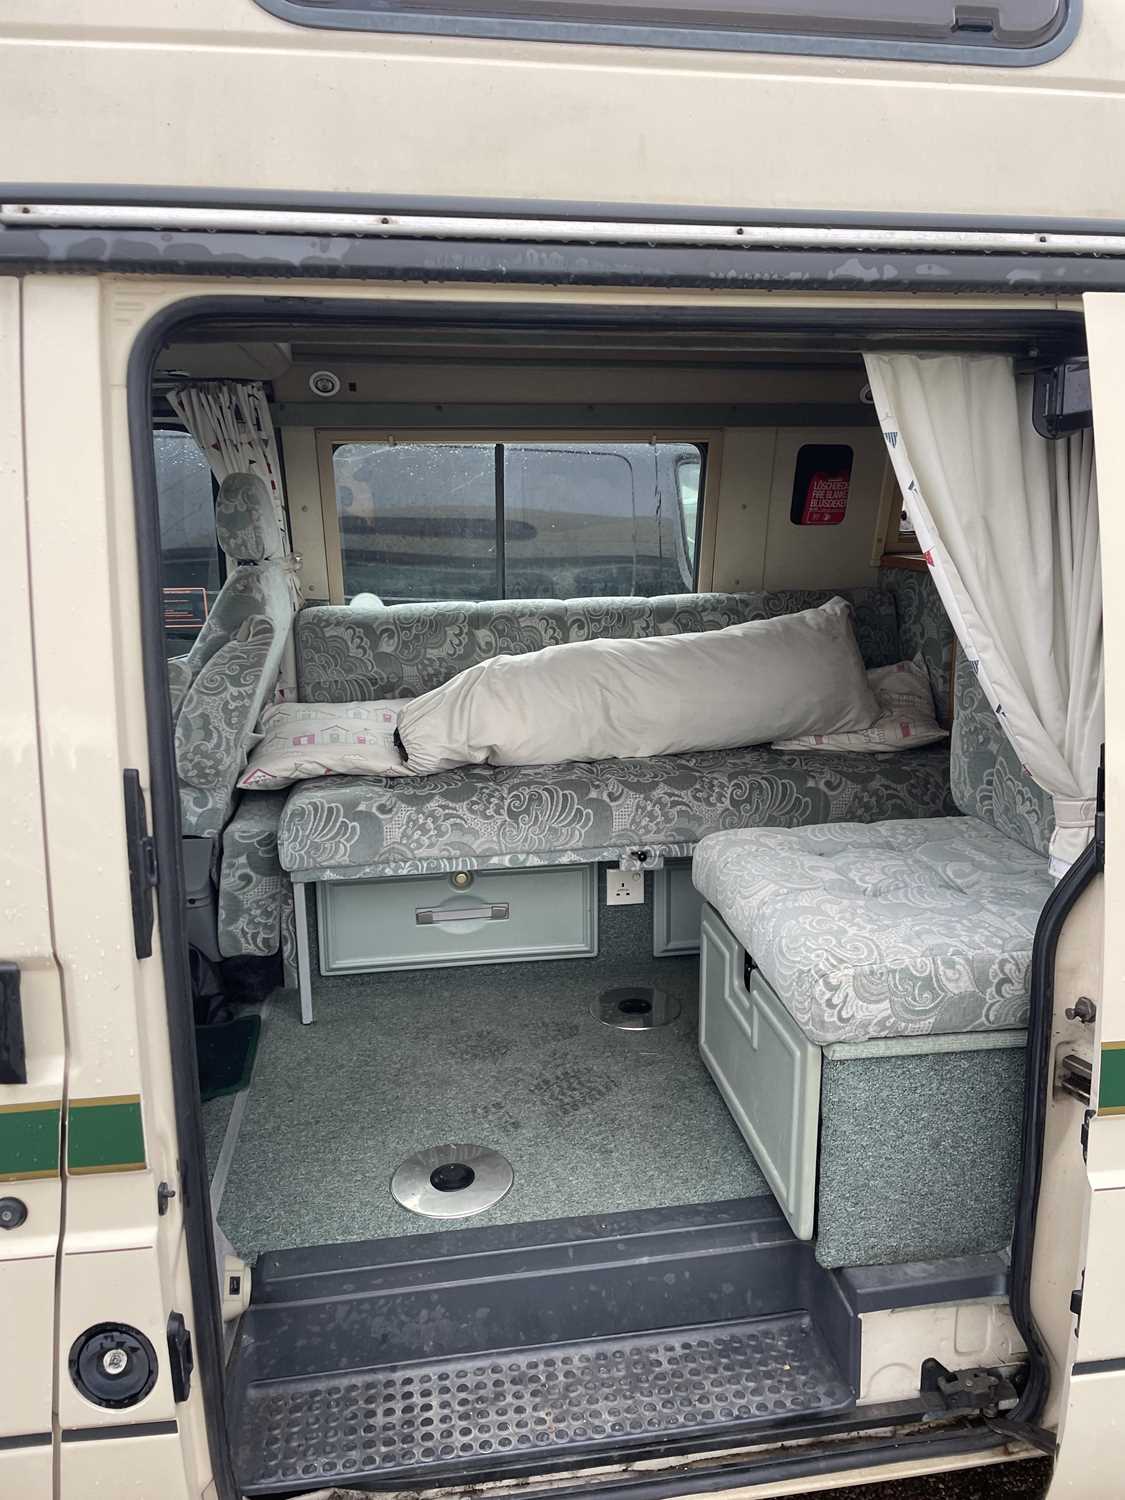 1996 Ford Transit Campervan Duetto Autosleeper - Image 15 of 17